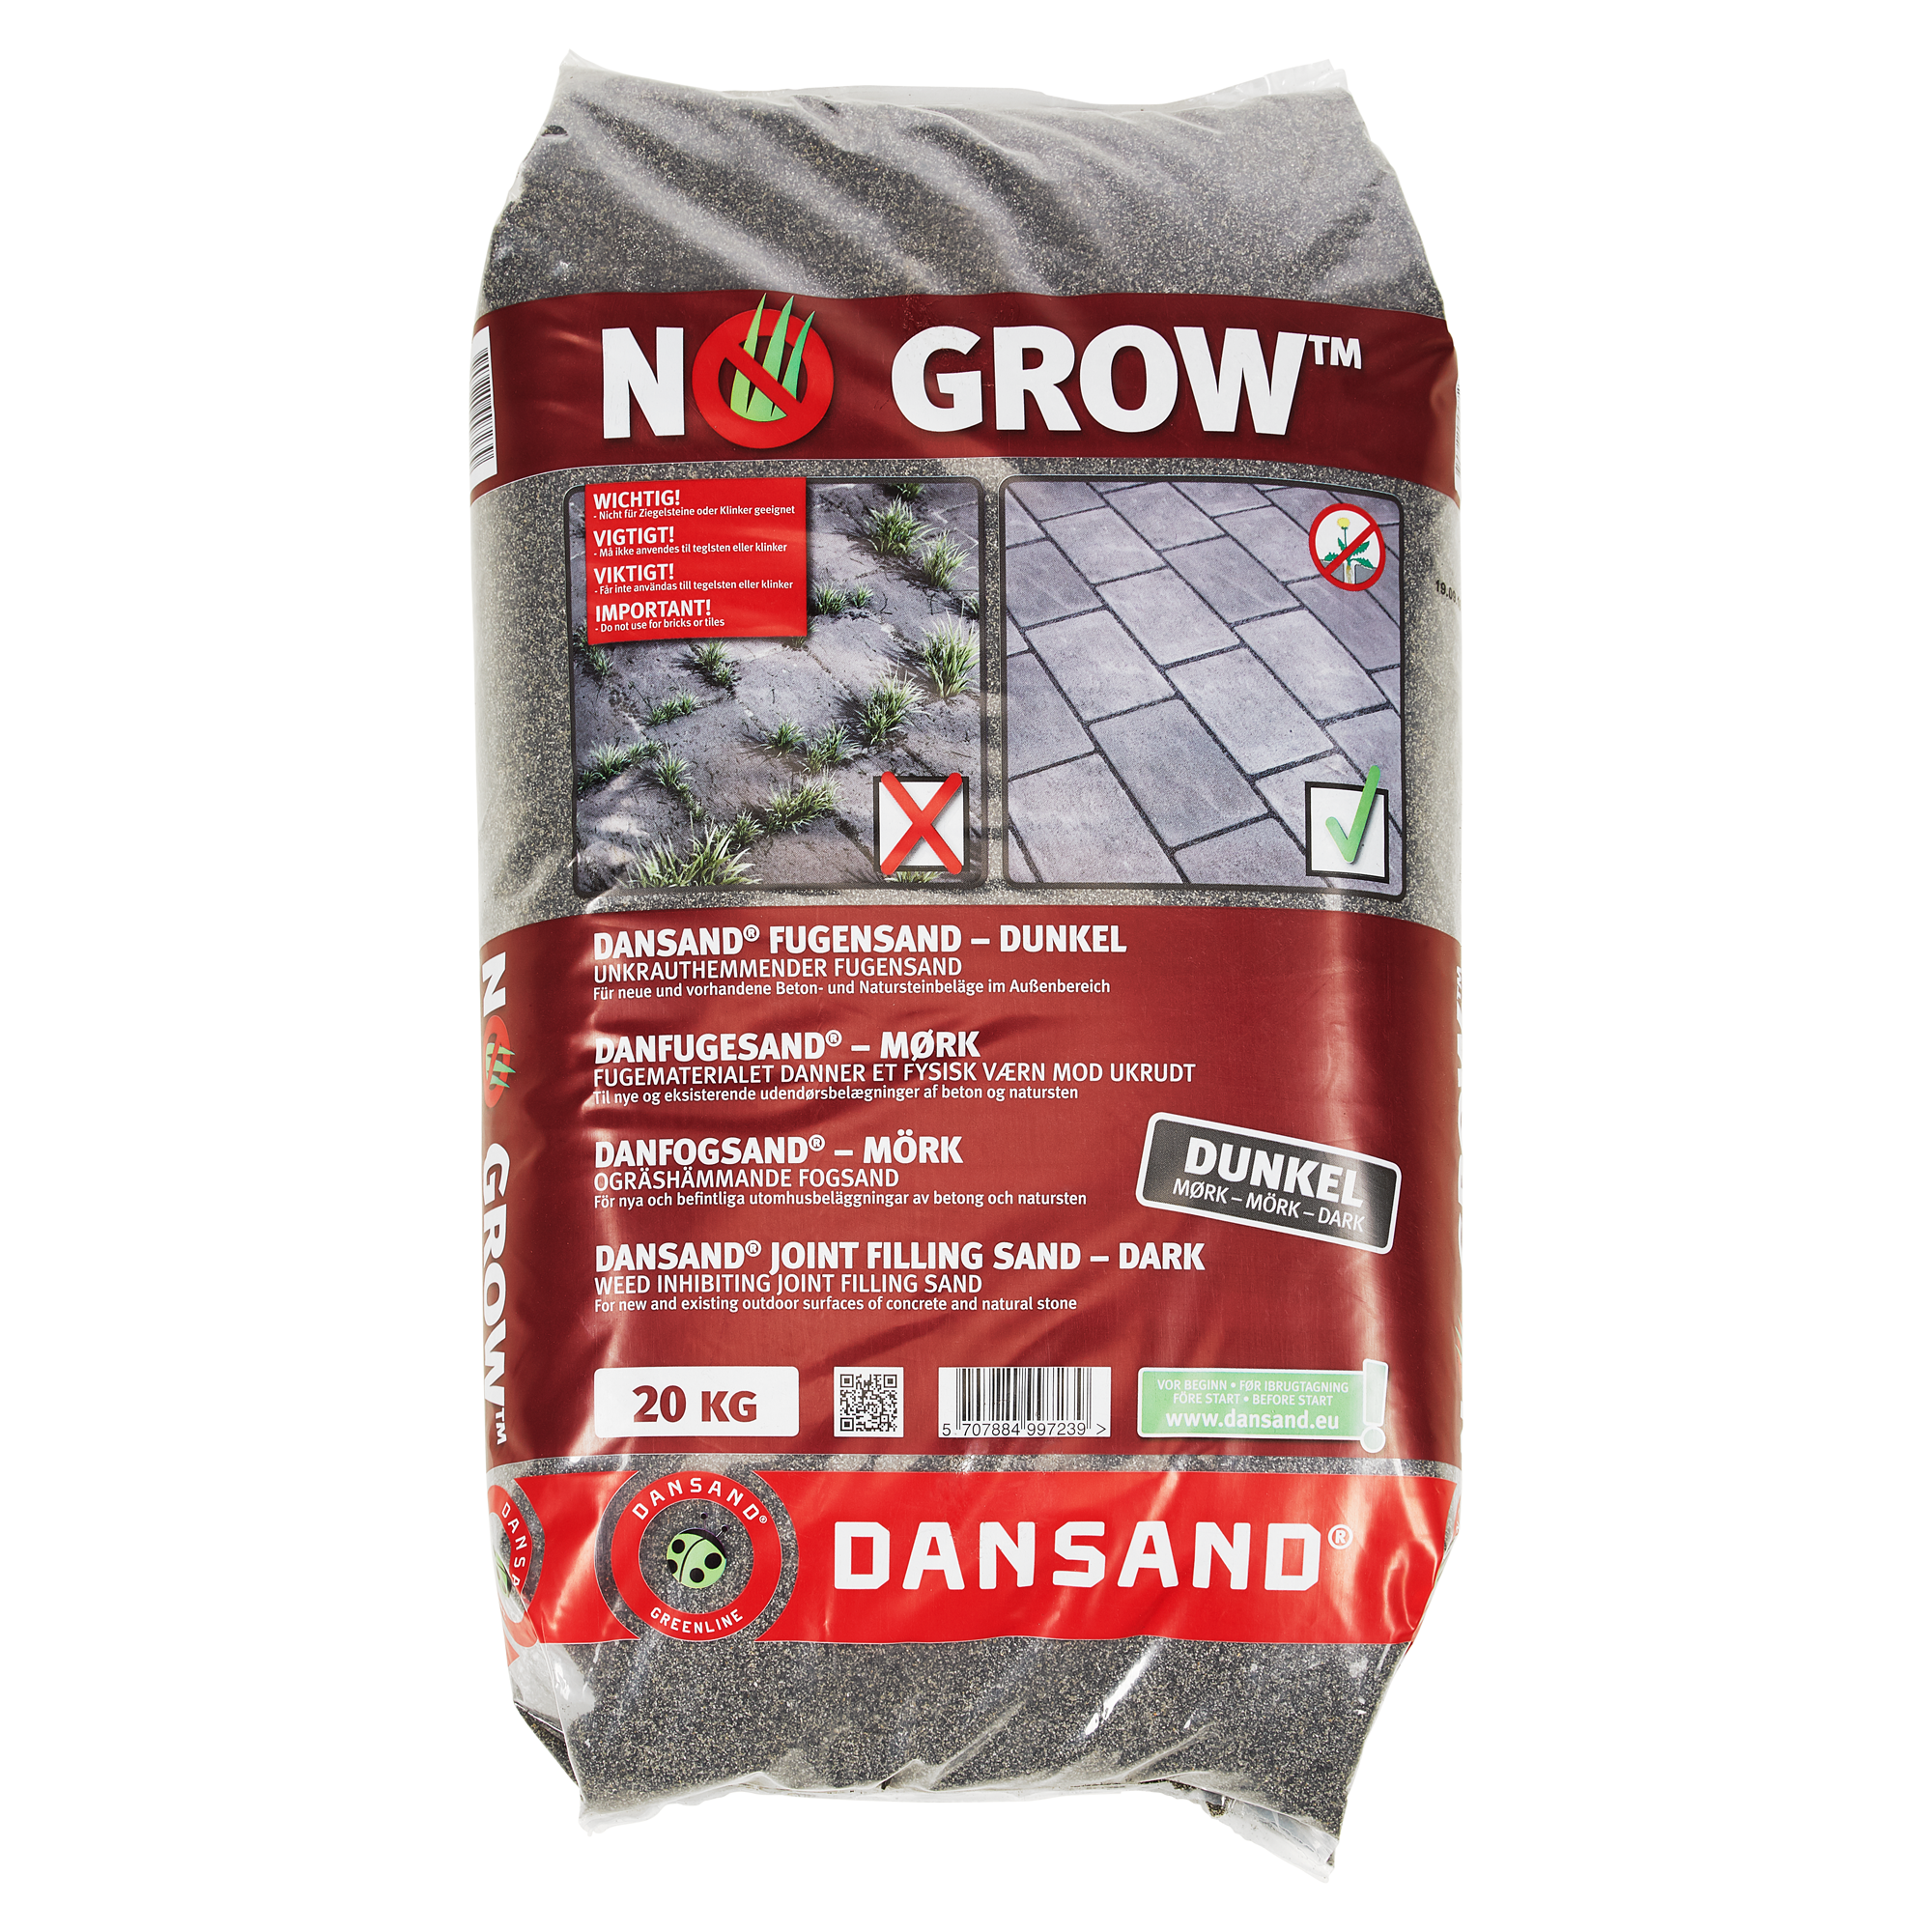 No Grow™ Fugensand dunkel 20 kg + product picture